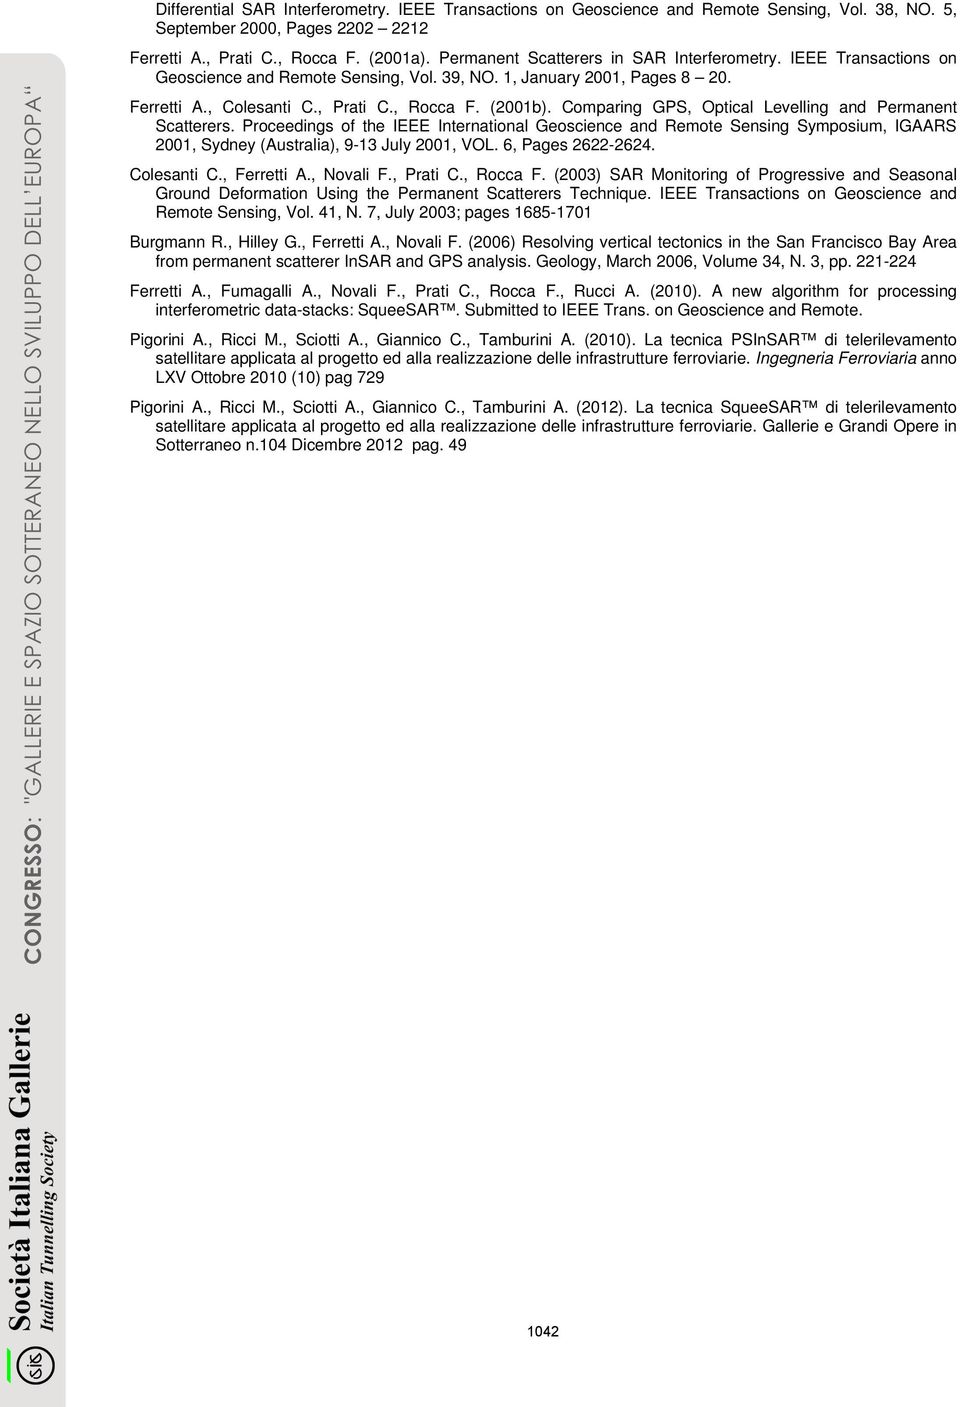 Comparing GPS, Optical Levelling and Permanent Scatterers. Proceedings of the IEEE International Geoscience and Remote Sensing Symposium, IGAARS 2001, Sydney (Australia), 9-13 July 2001, VOL.